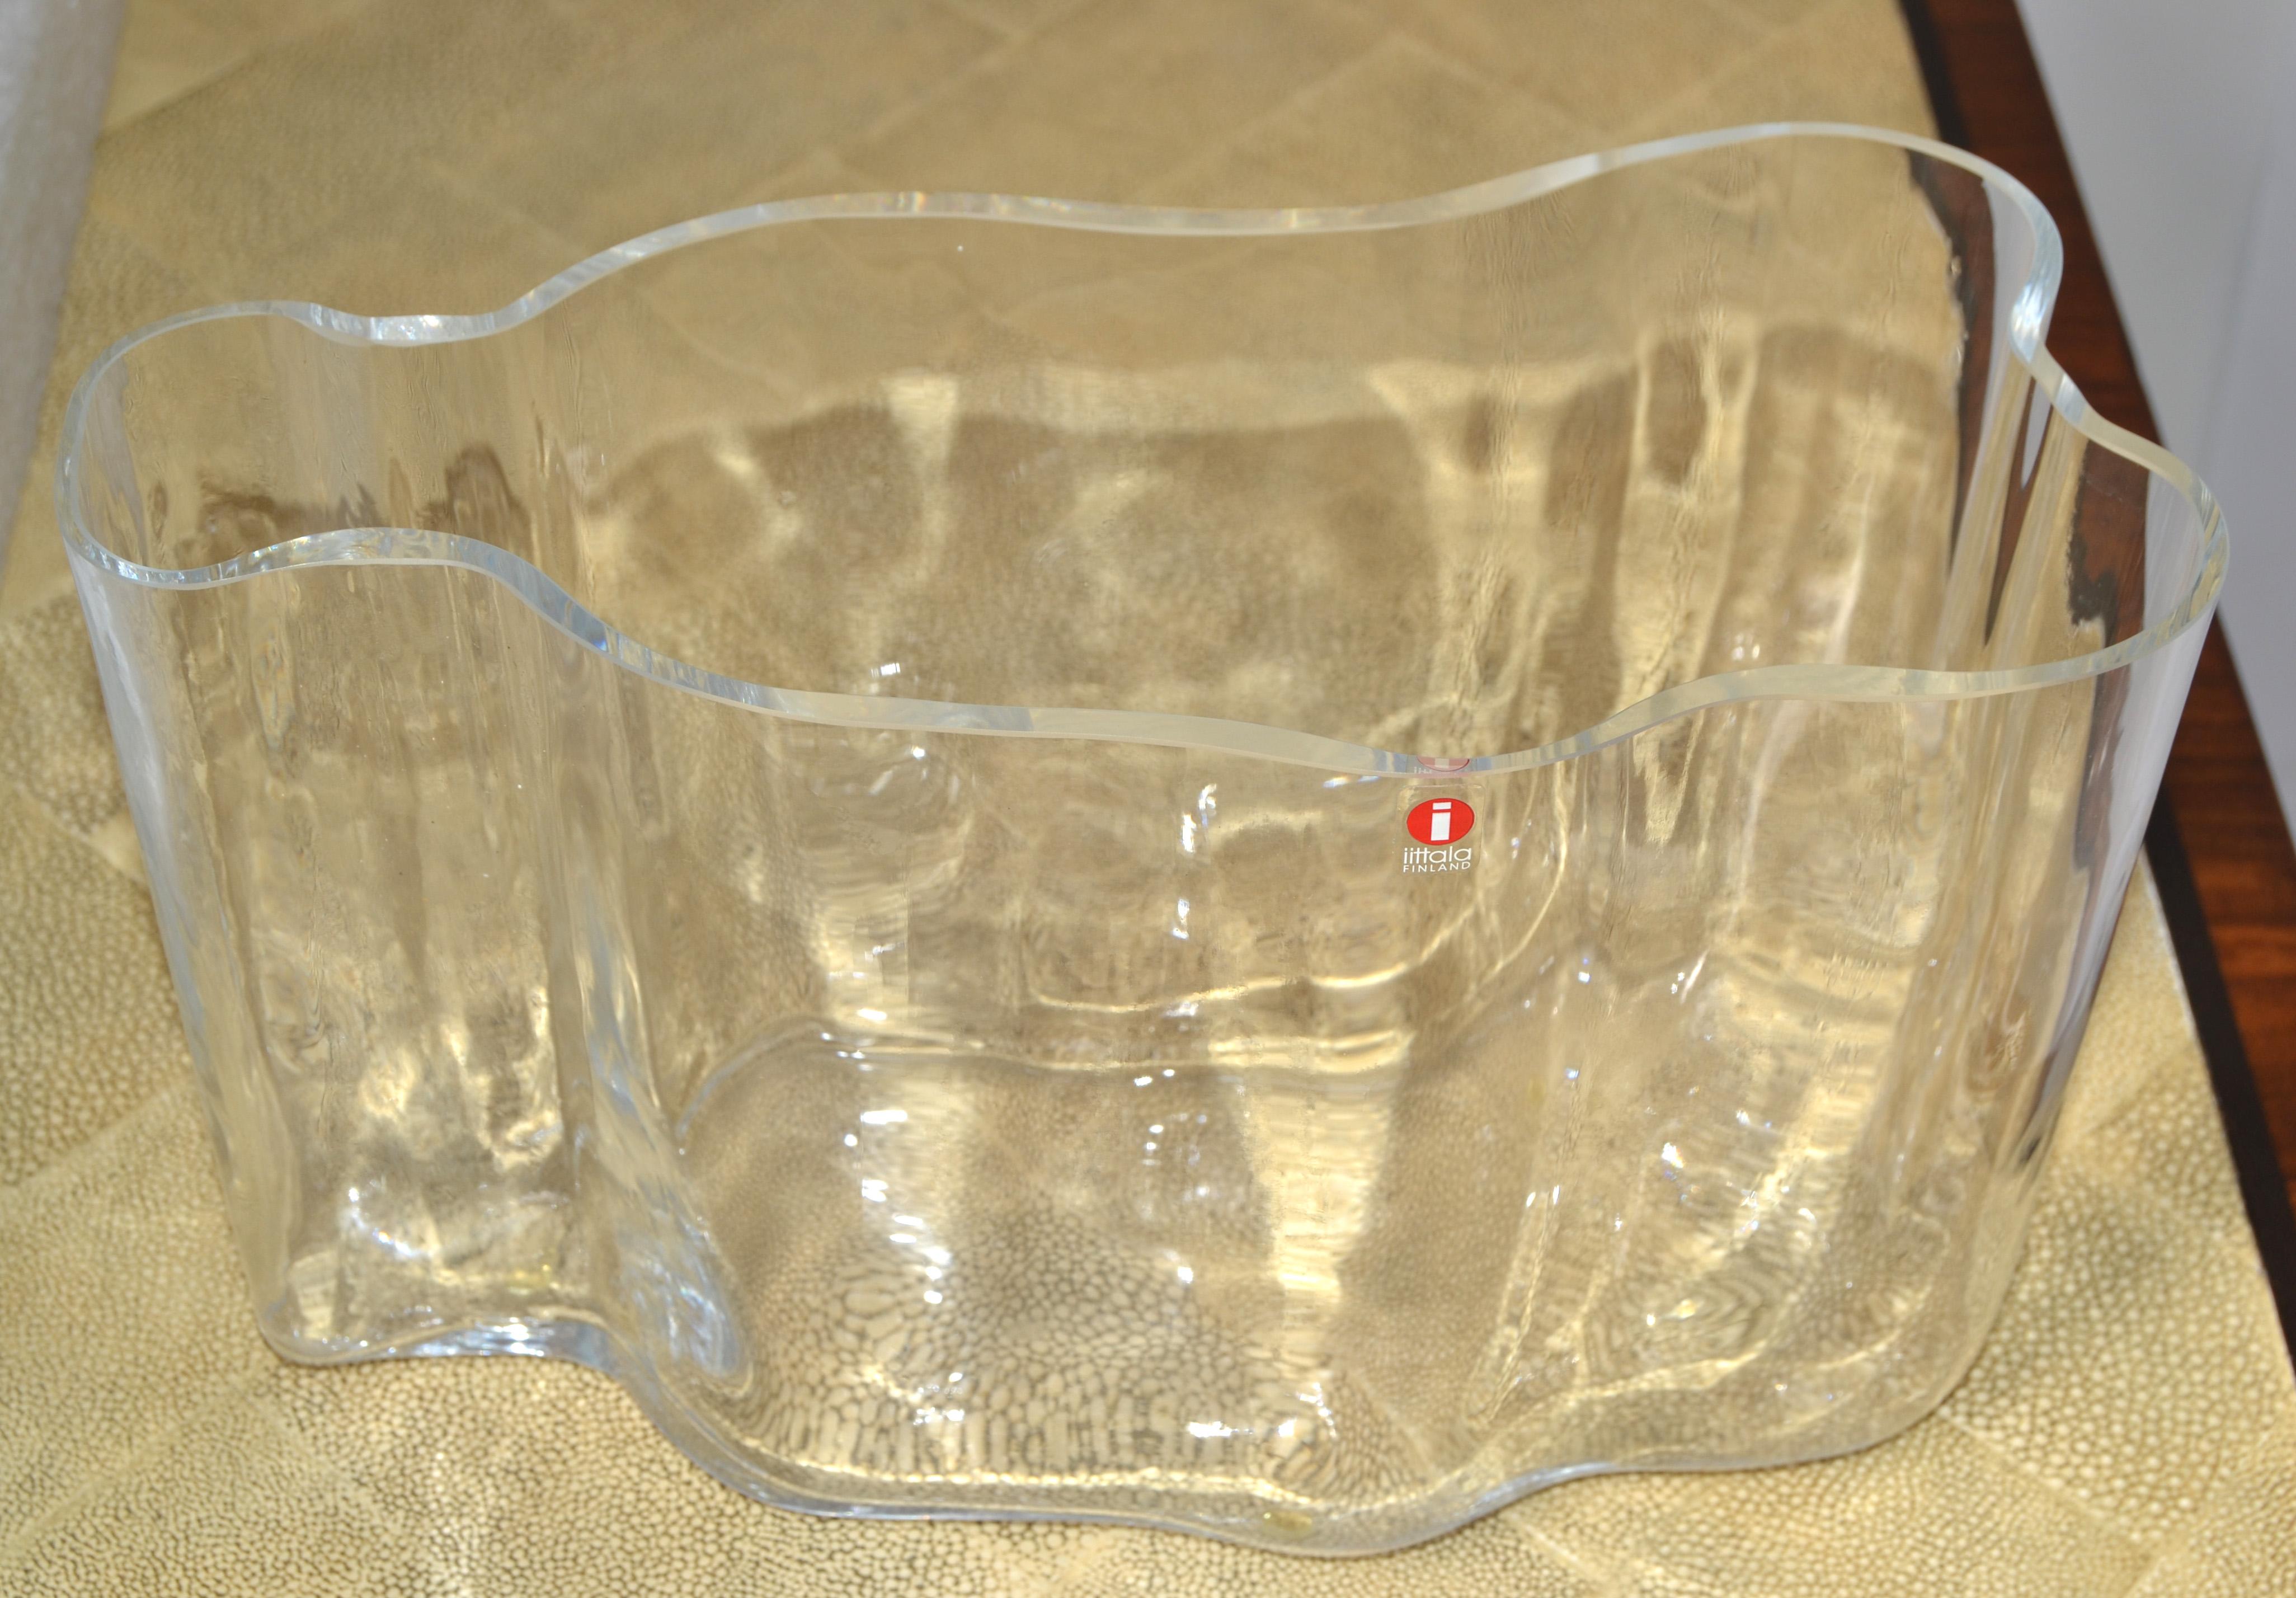 Scandinavian Modern sculptural transparent art glass savoy vase designed by Alvar Aalto for Iittala, made in Finland. 
This is a beautiful handmade iconic piece from the 1980s.
Foil label is attached to the vase, Iittala Finland.
  